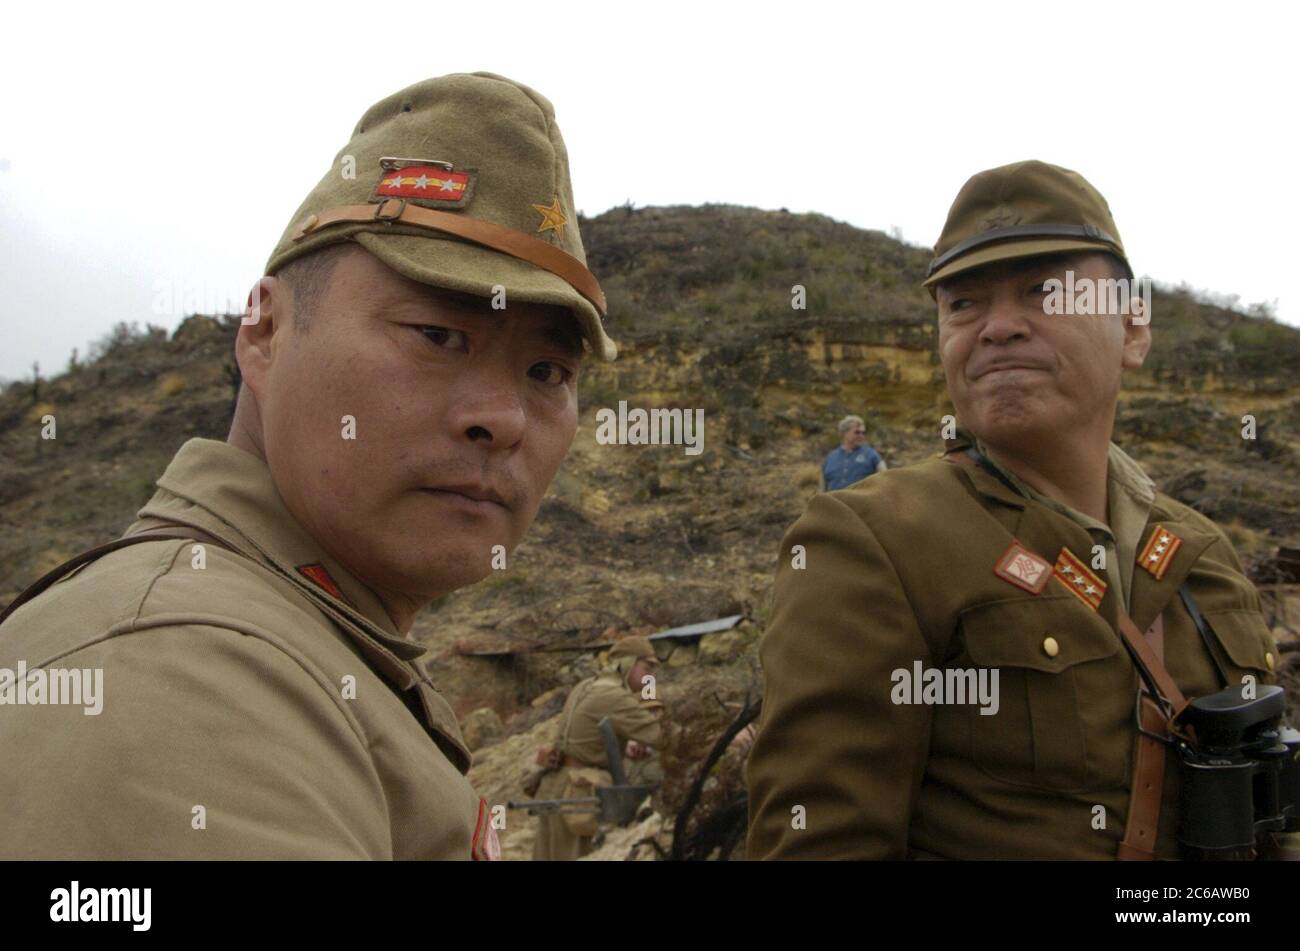 Fredericksburg, Texas USA, February 19 2005: Japanese men participate in historical reenactment of World War II battles on Pacific islands between Japanese and Allied soldiers. The reenactment was staged at the National Museum of the Pacific War. ©Bob Daemmrich Stock Photo